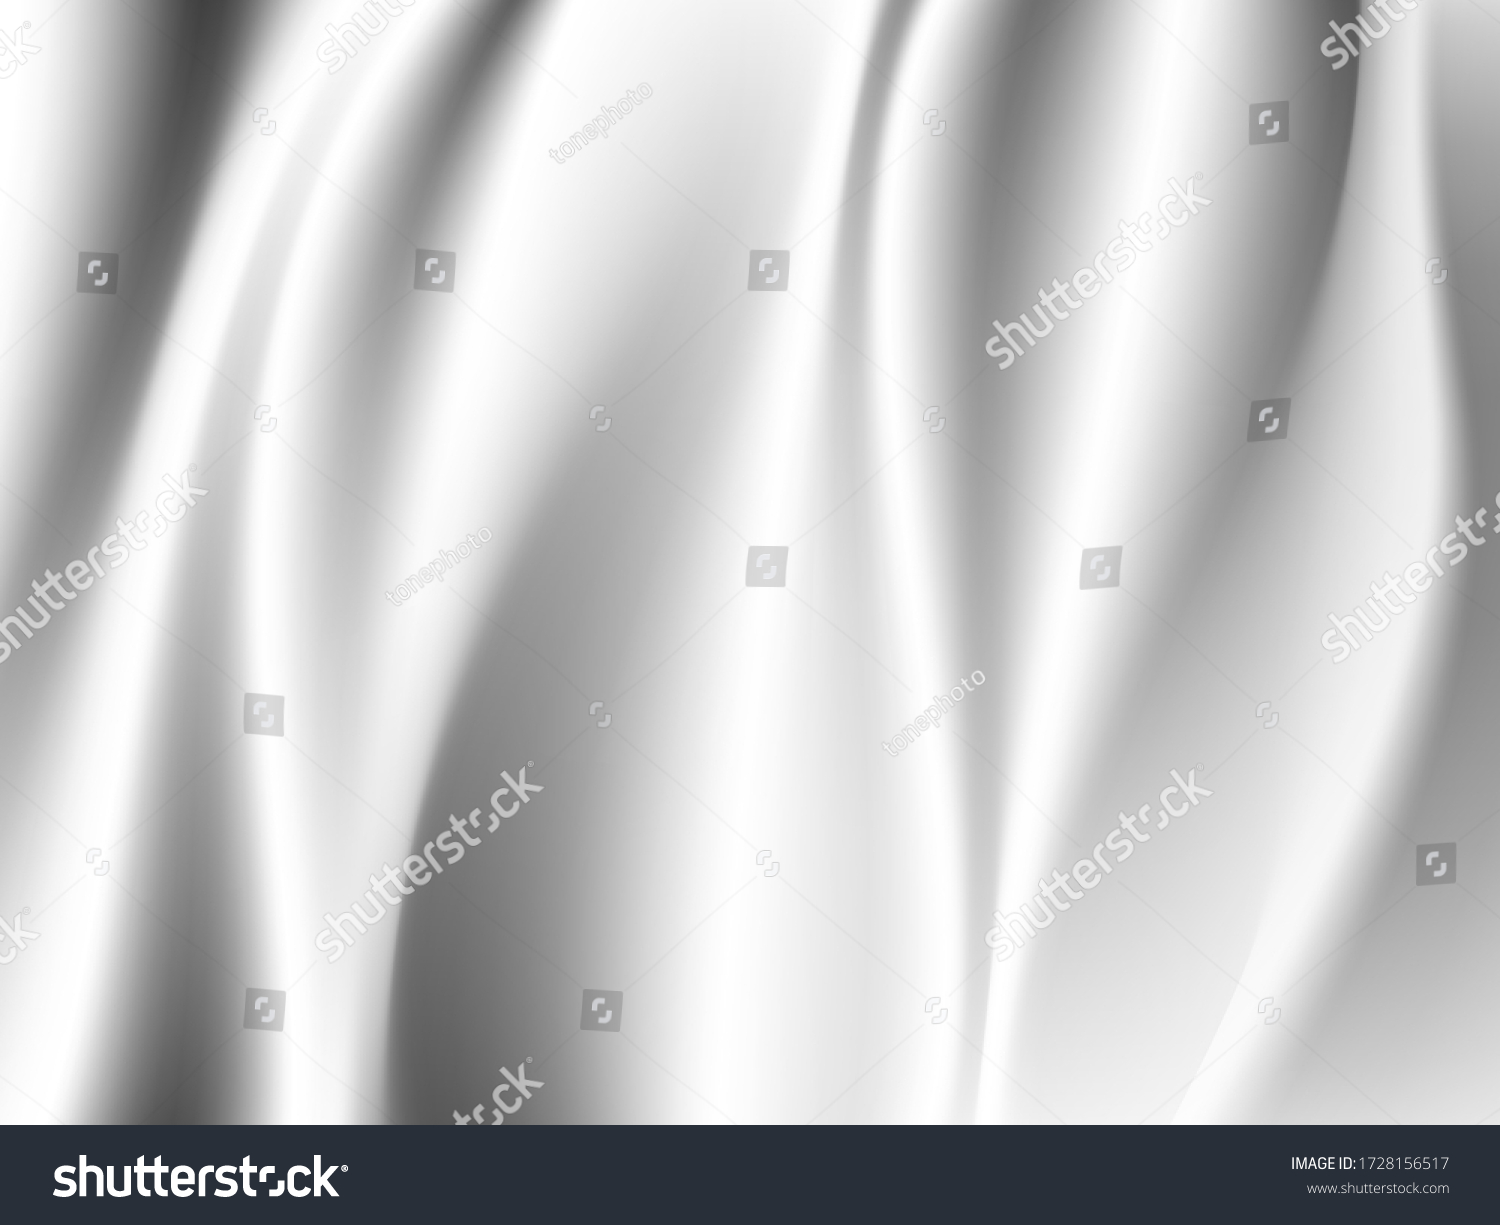 white silk cloth fabric wave overlapping with light and shadow. white and gray abstract texture background and copy space for web design #1728156517